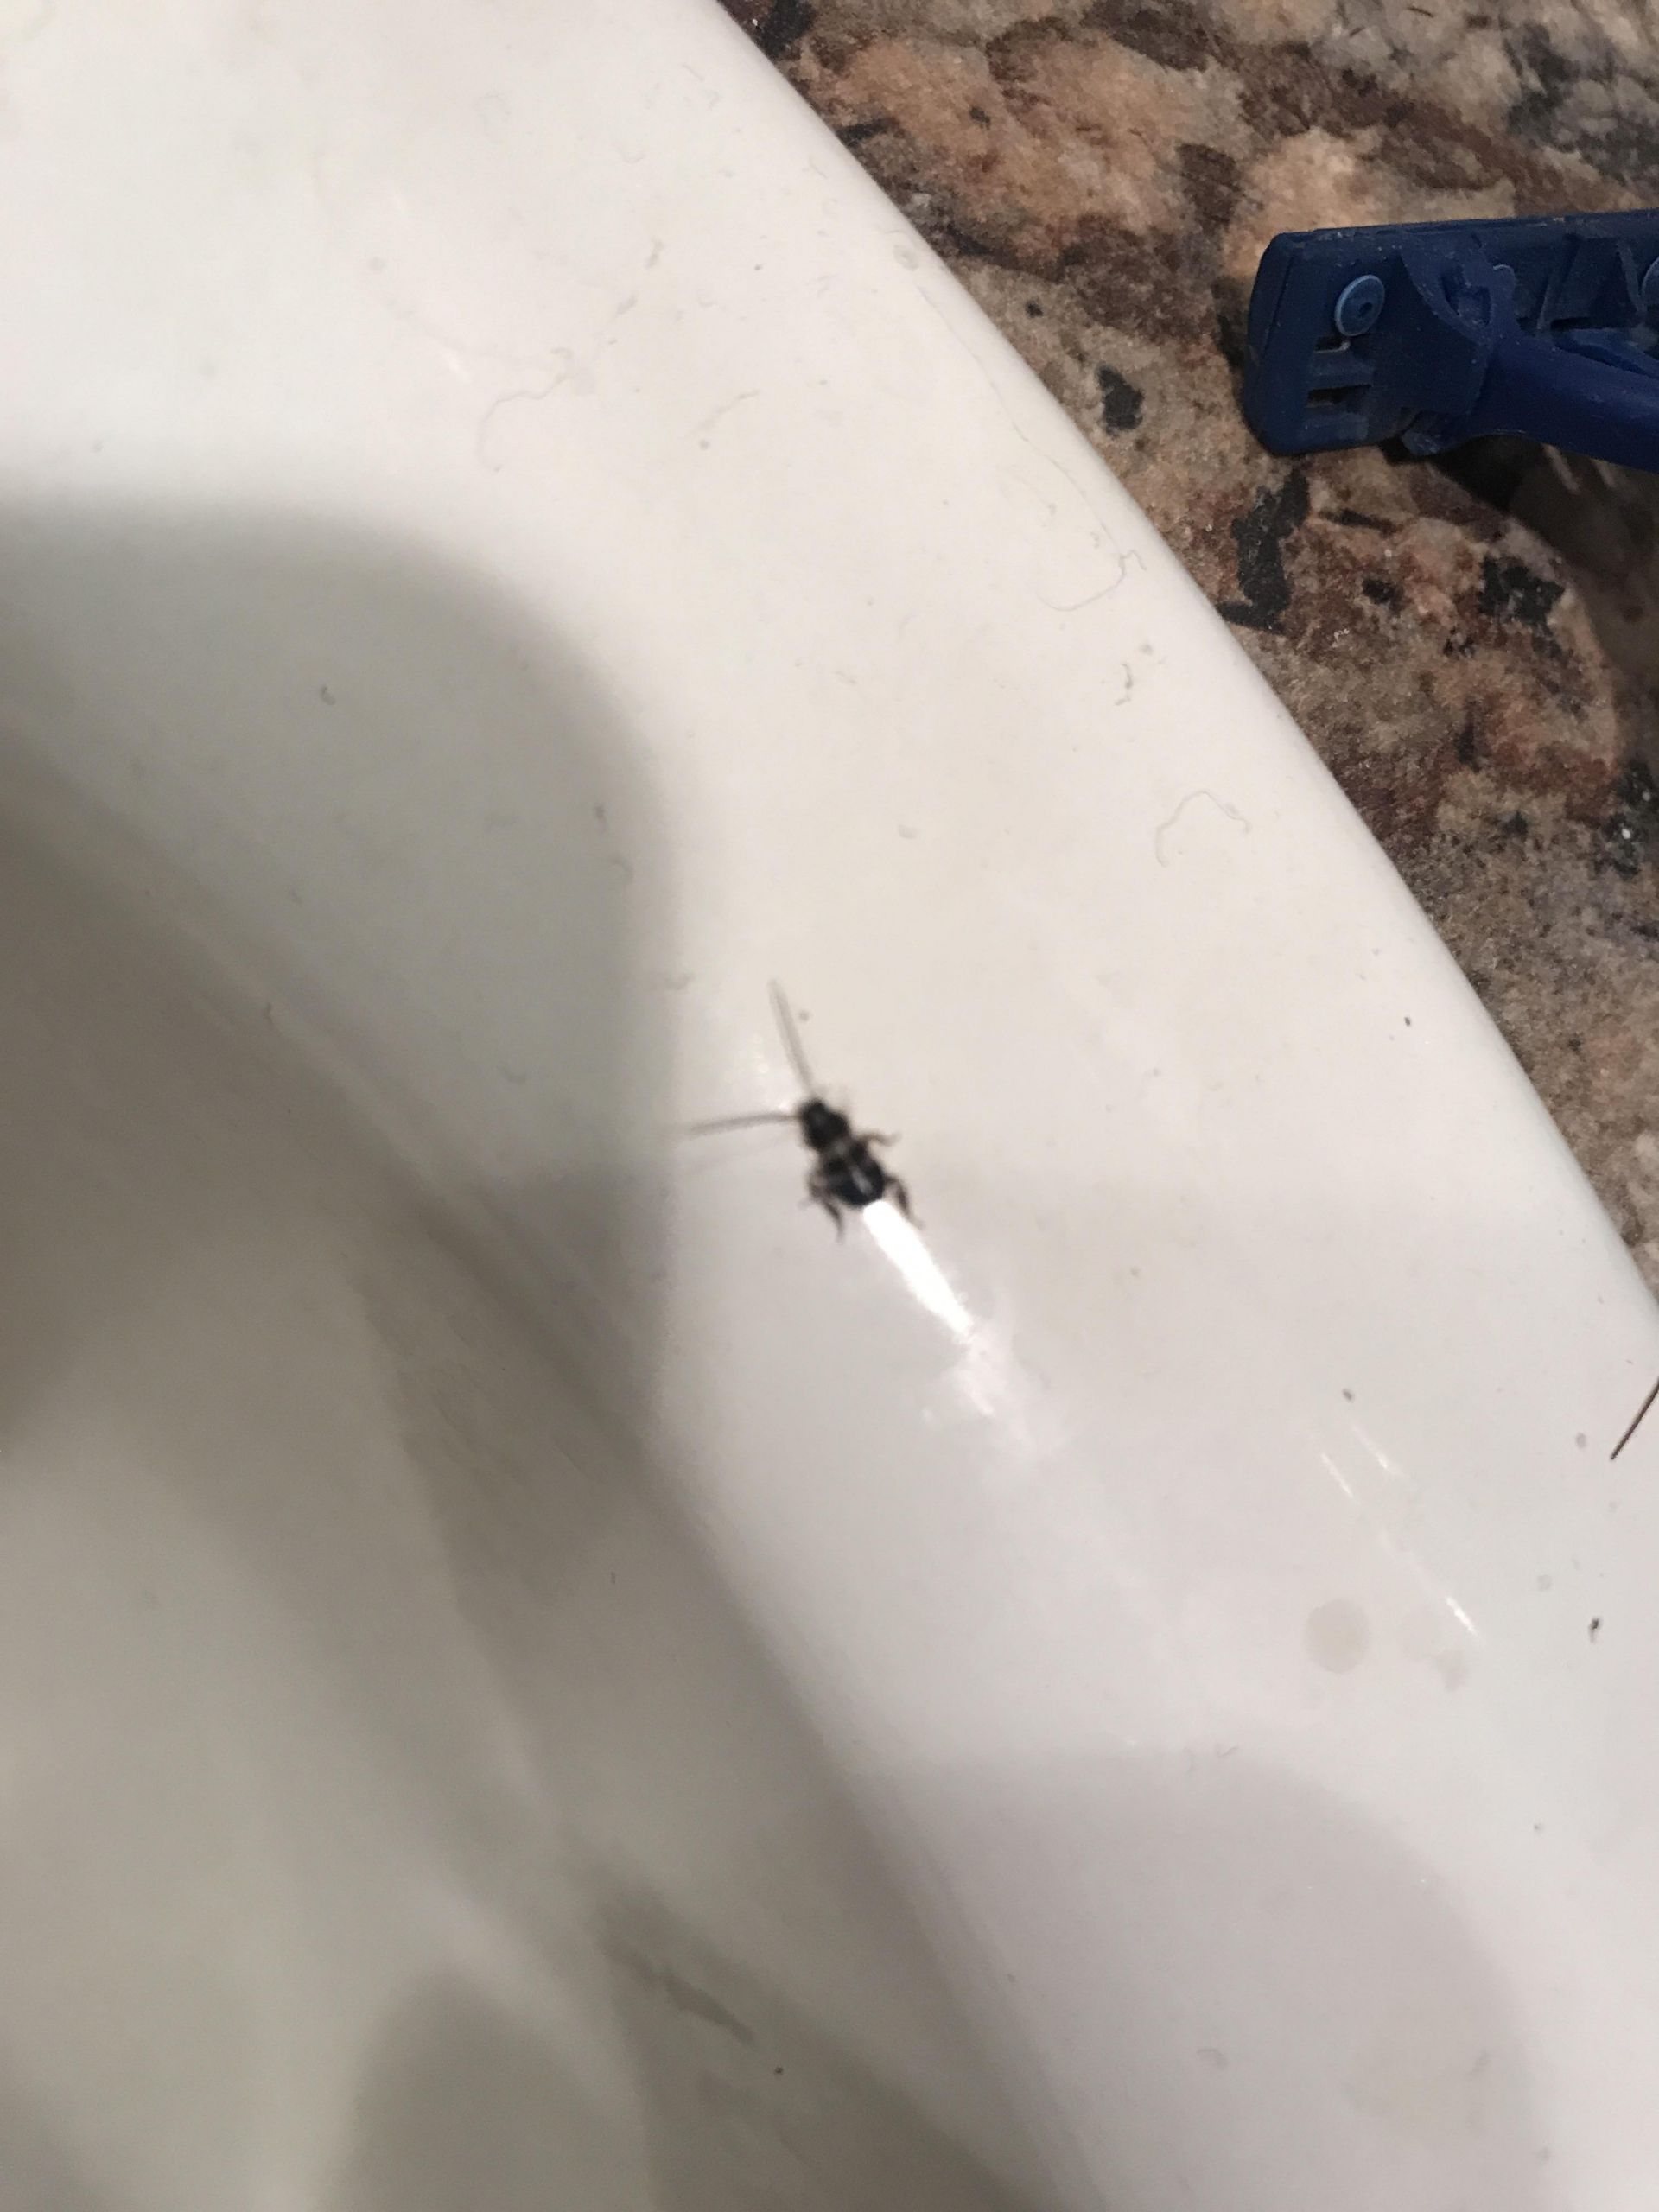 Small Bugs In Bathroom
 Tampa Florida I keep finding these small black bugs in